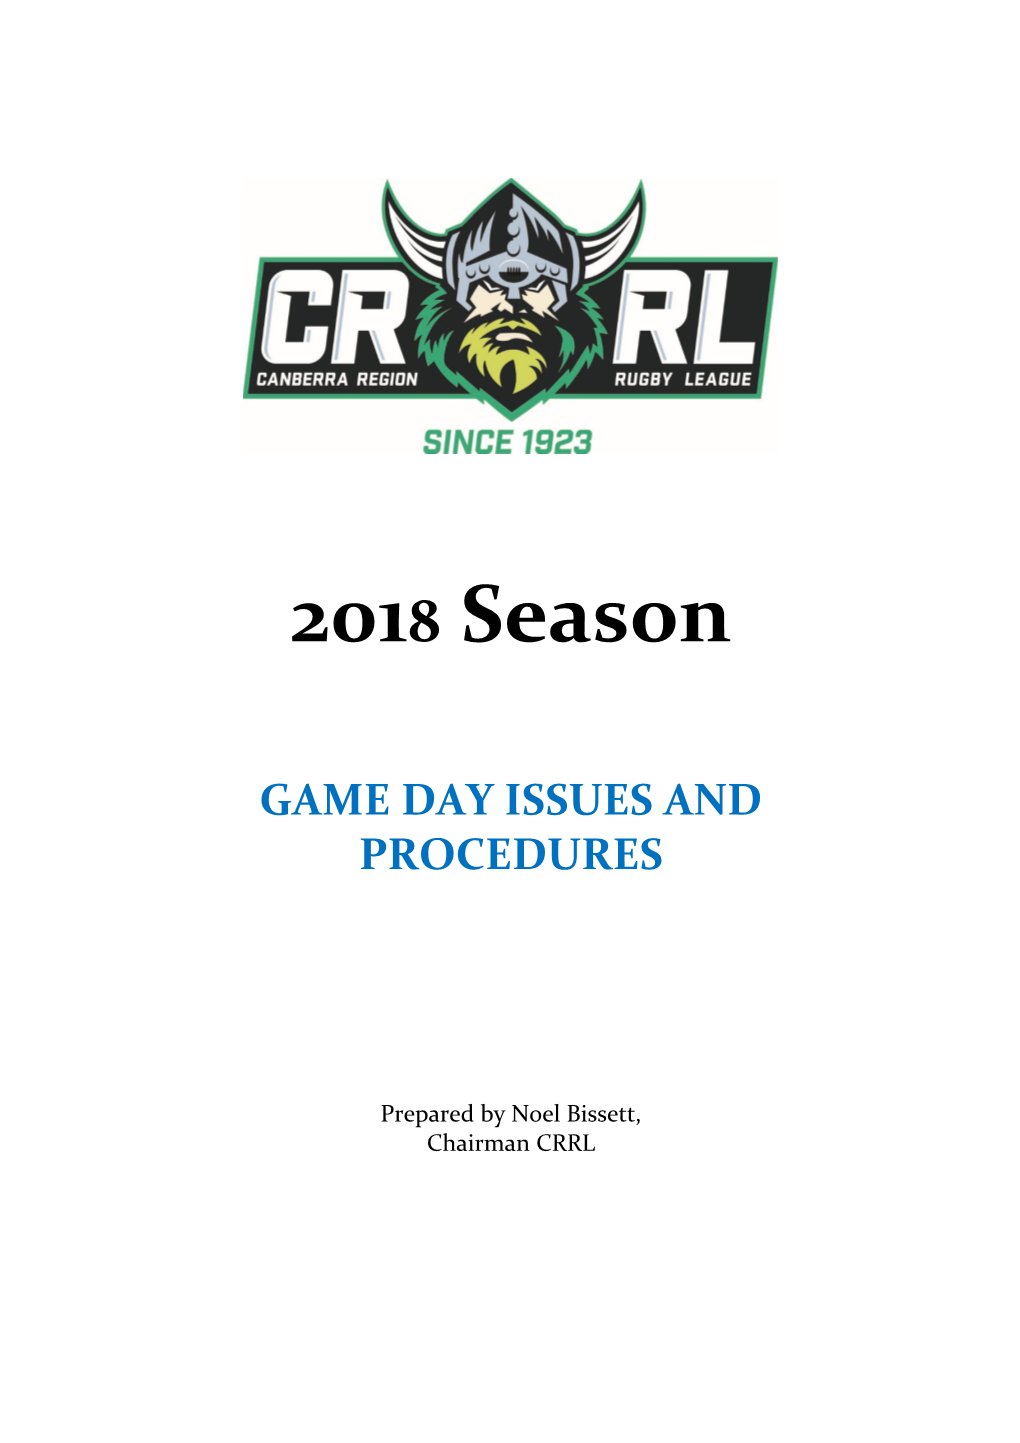 Game Day Issues and Procedures